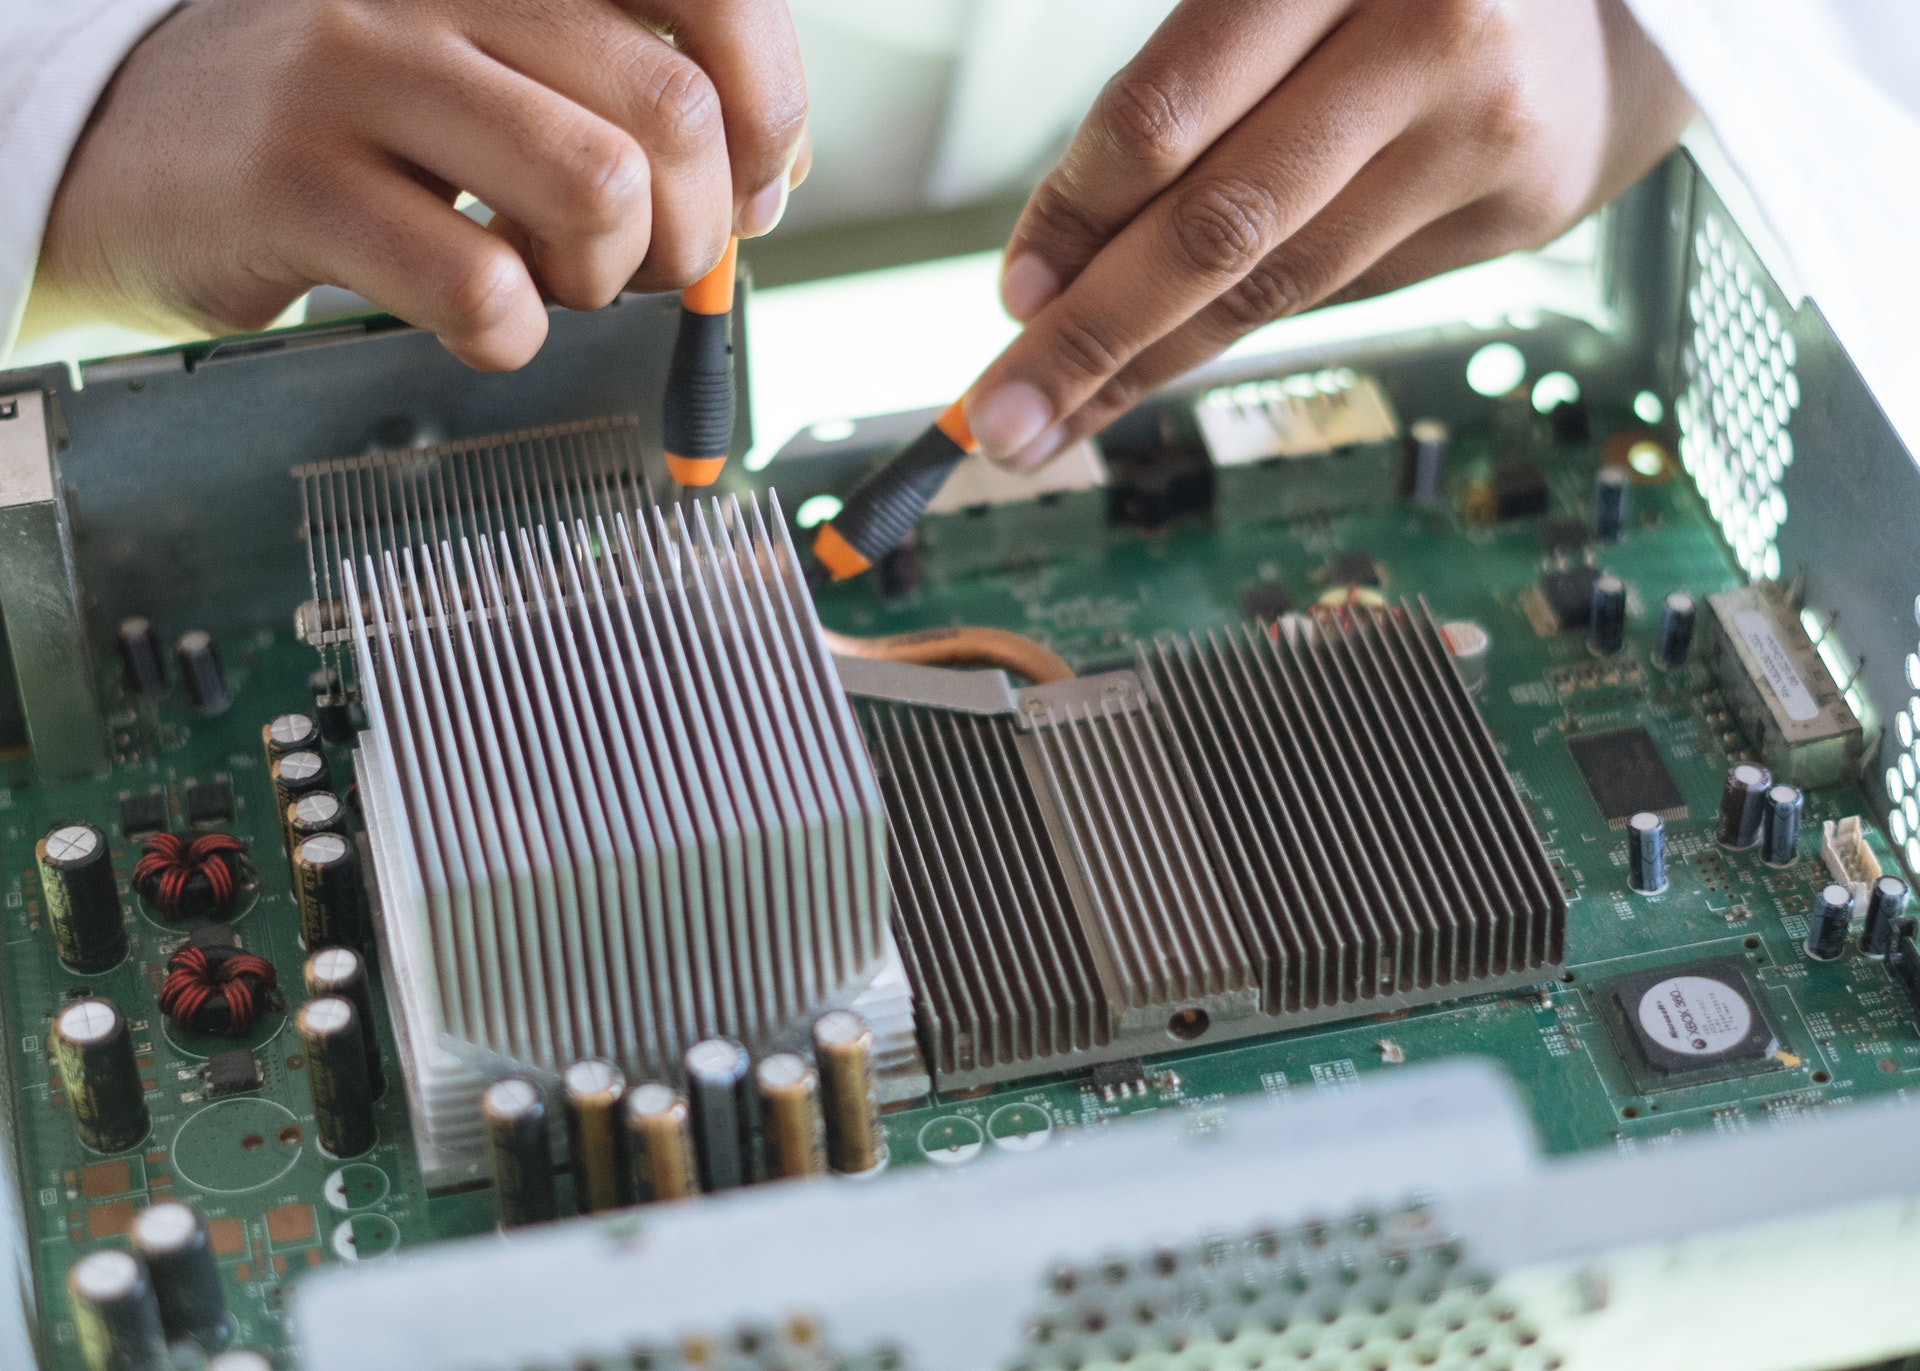 What To Look For In A Good Digital Tech Repair Shop